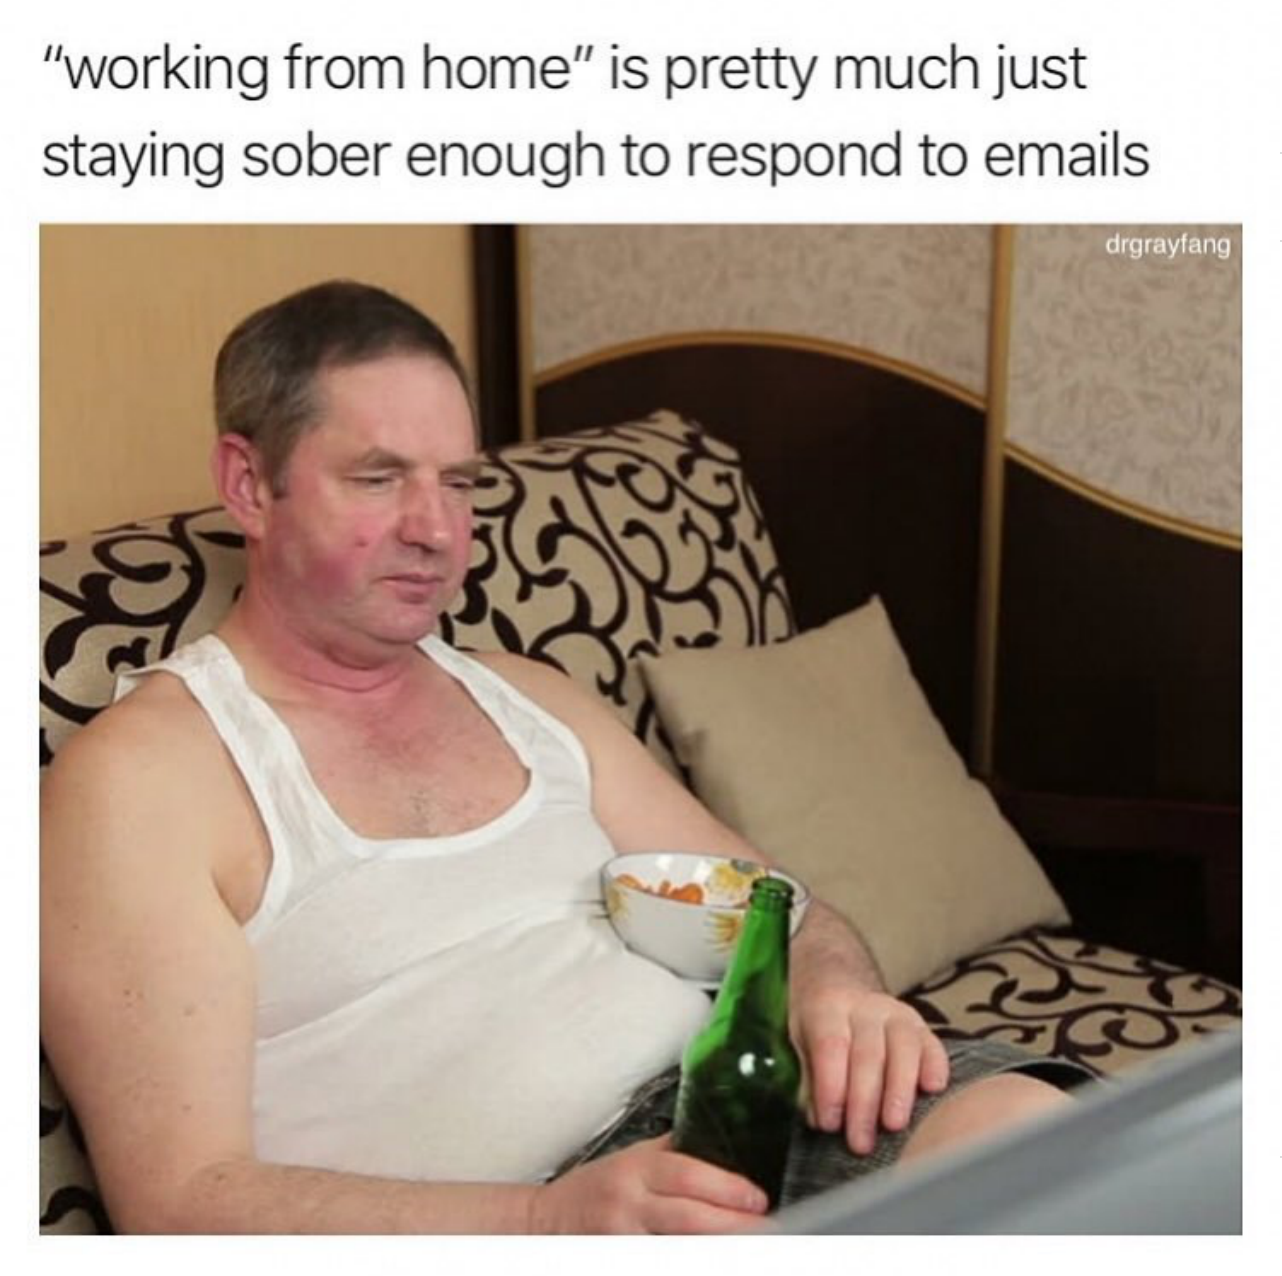 work memes - working from home sober meme - "working from home" i...